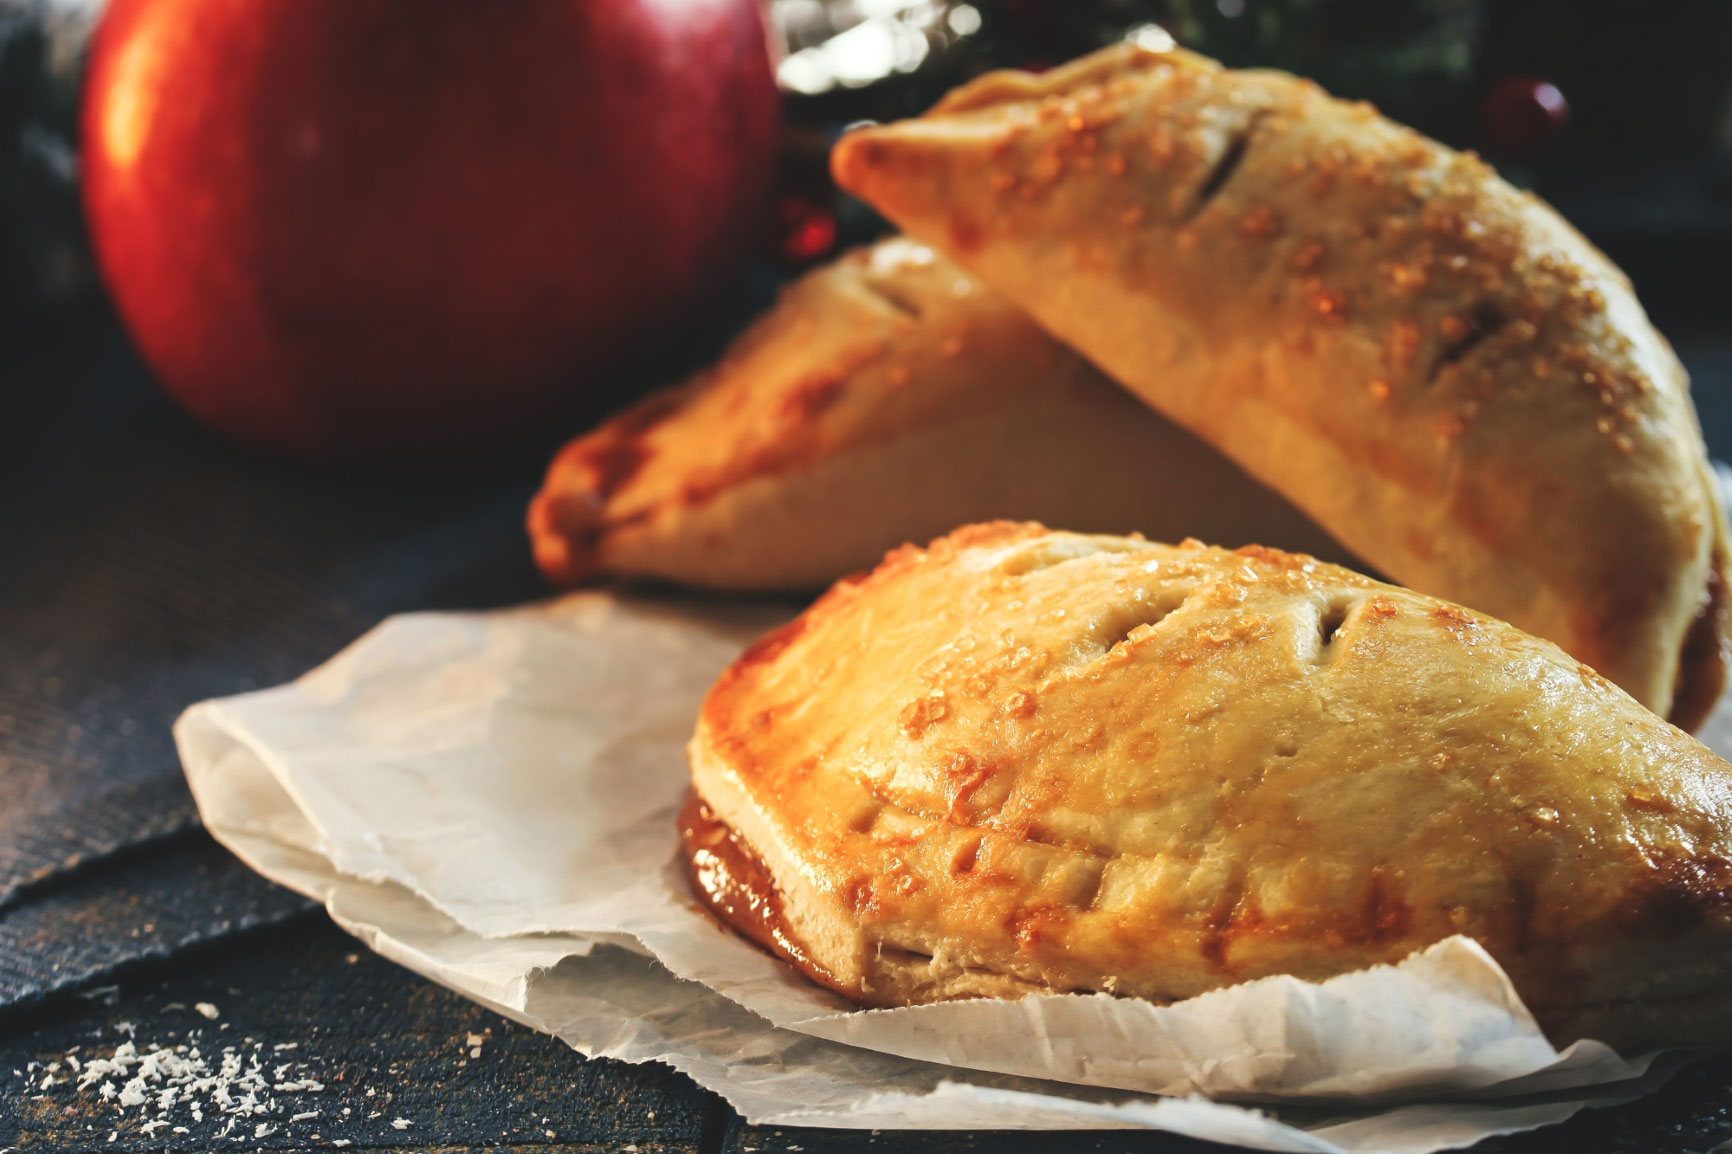 Spiced Apple Hand Pies With Maple Butter Drizzle